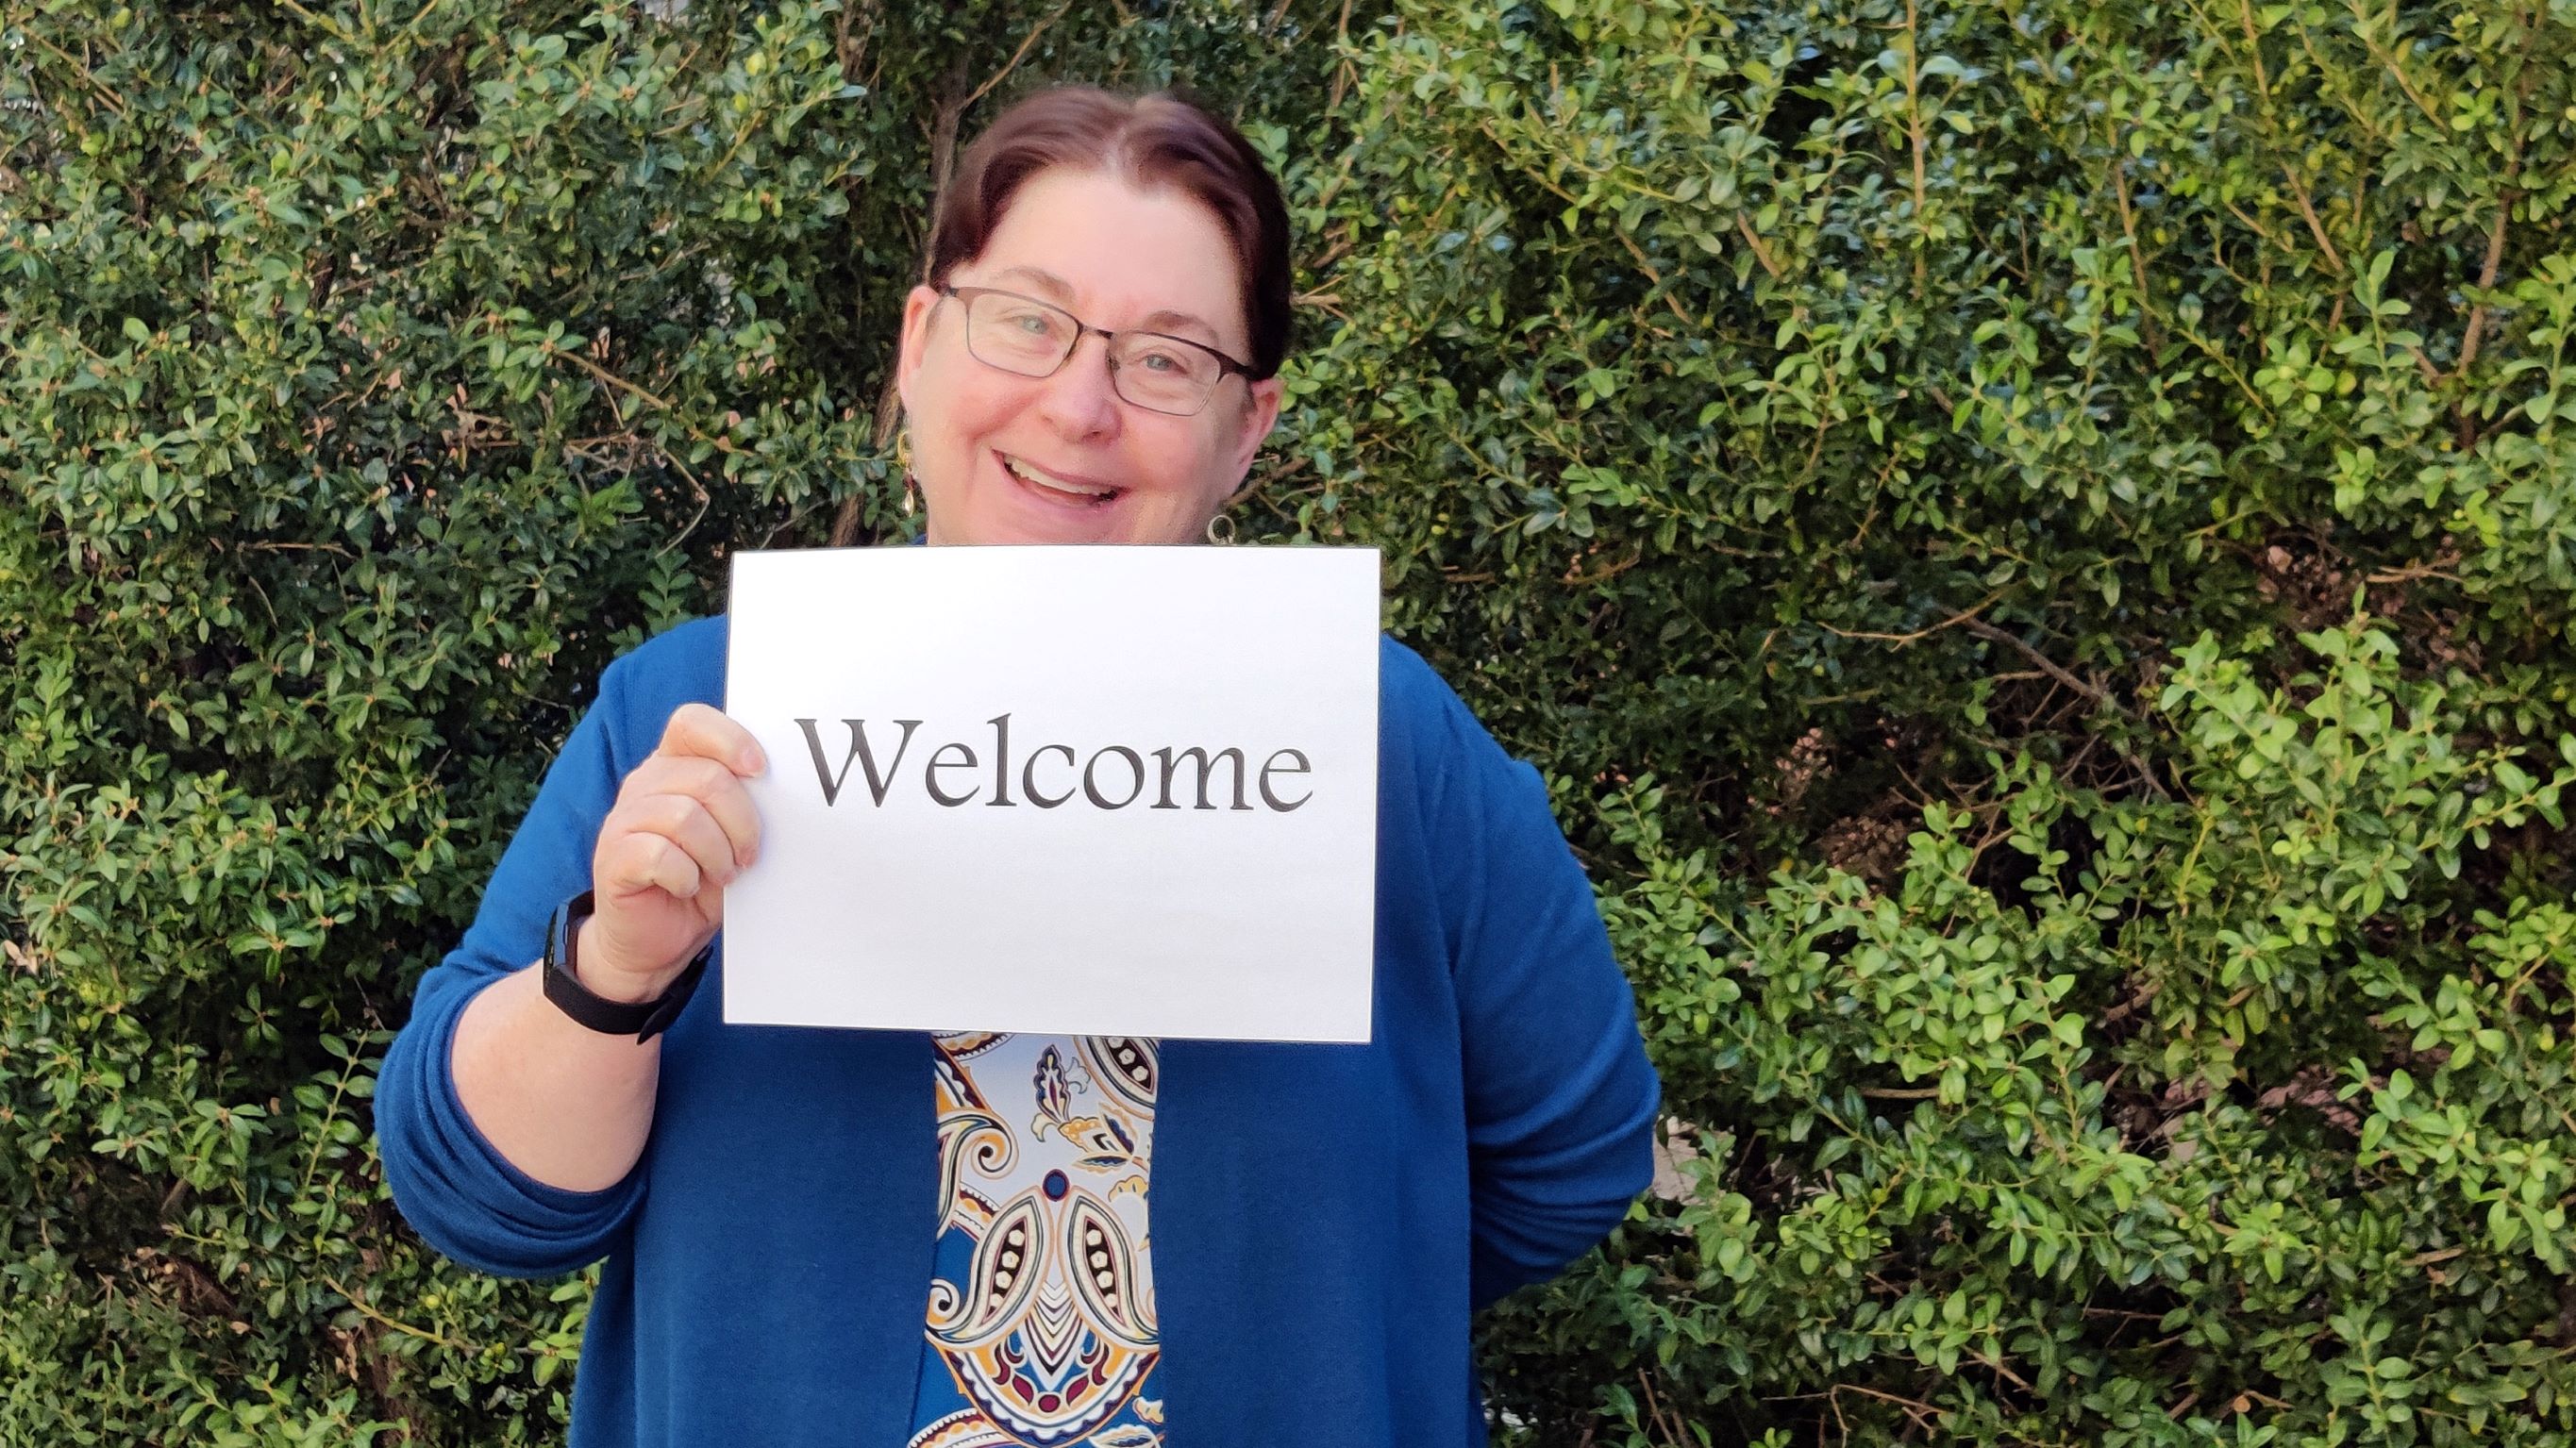 A middle aged white woman wearing glasses is smiling and holding a sign that says "Welcome"